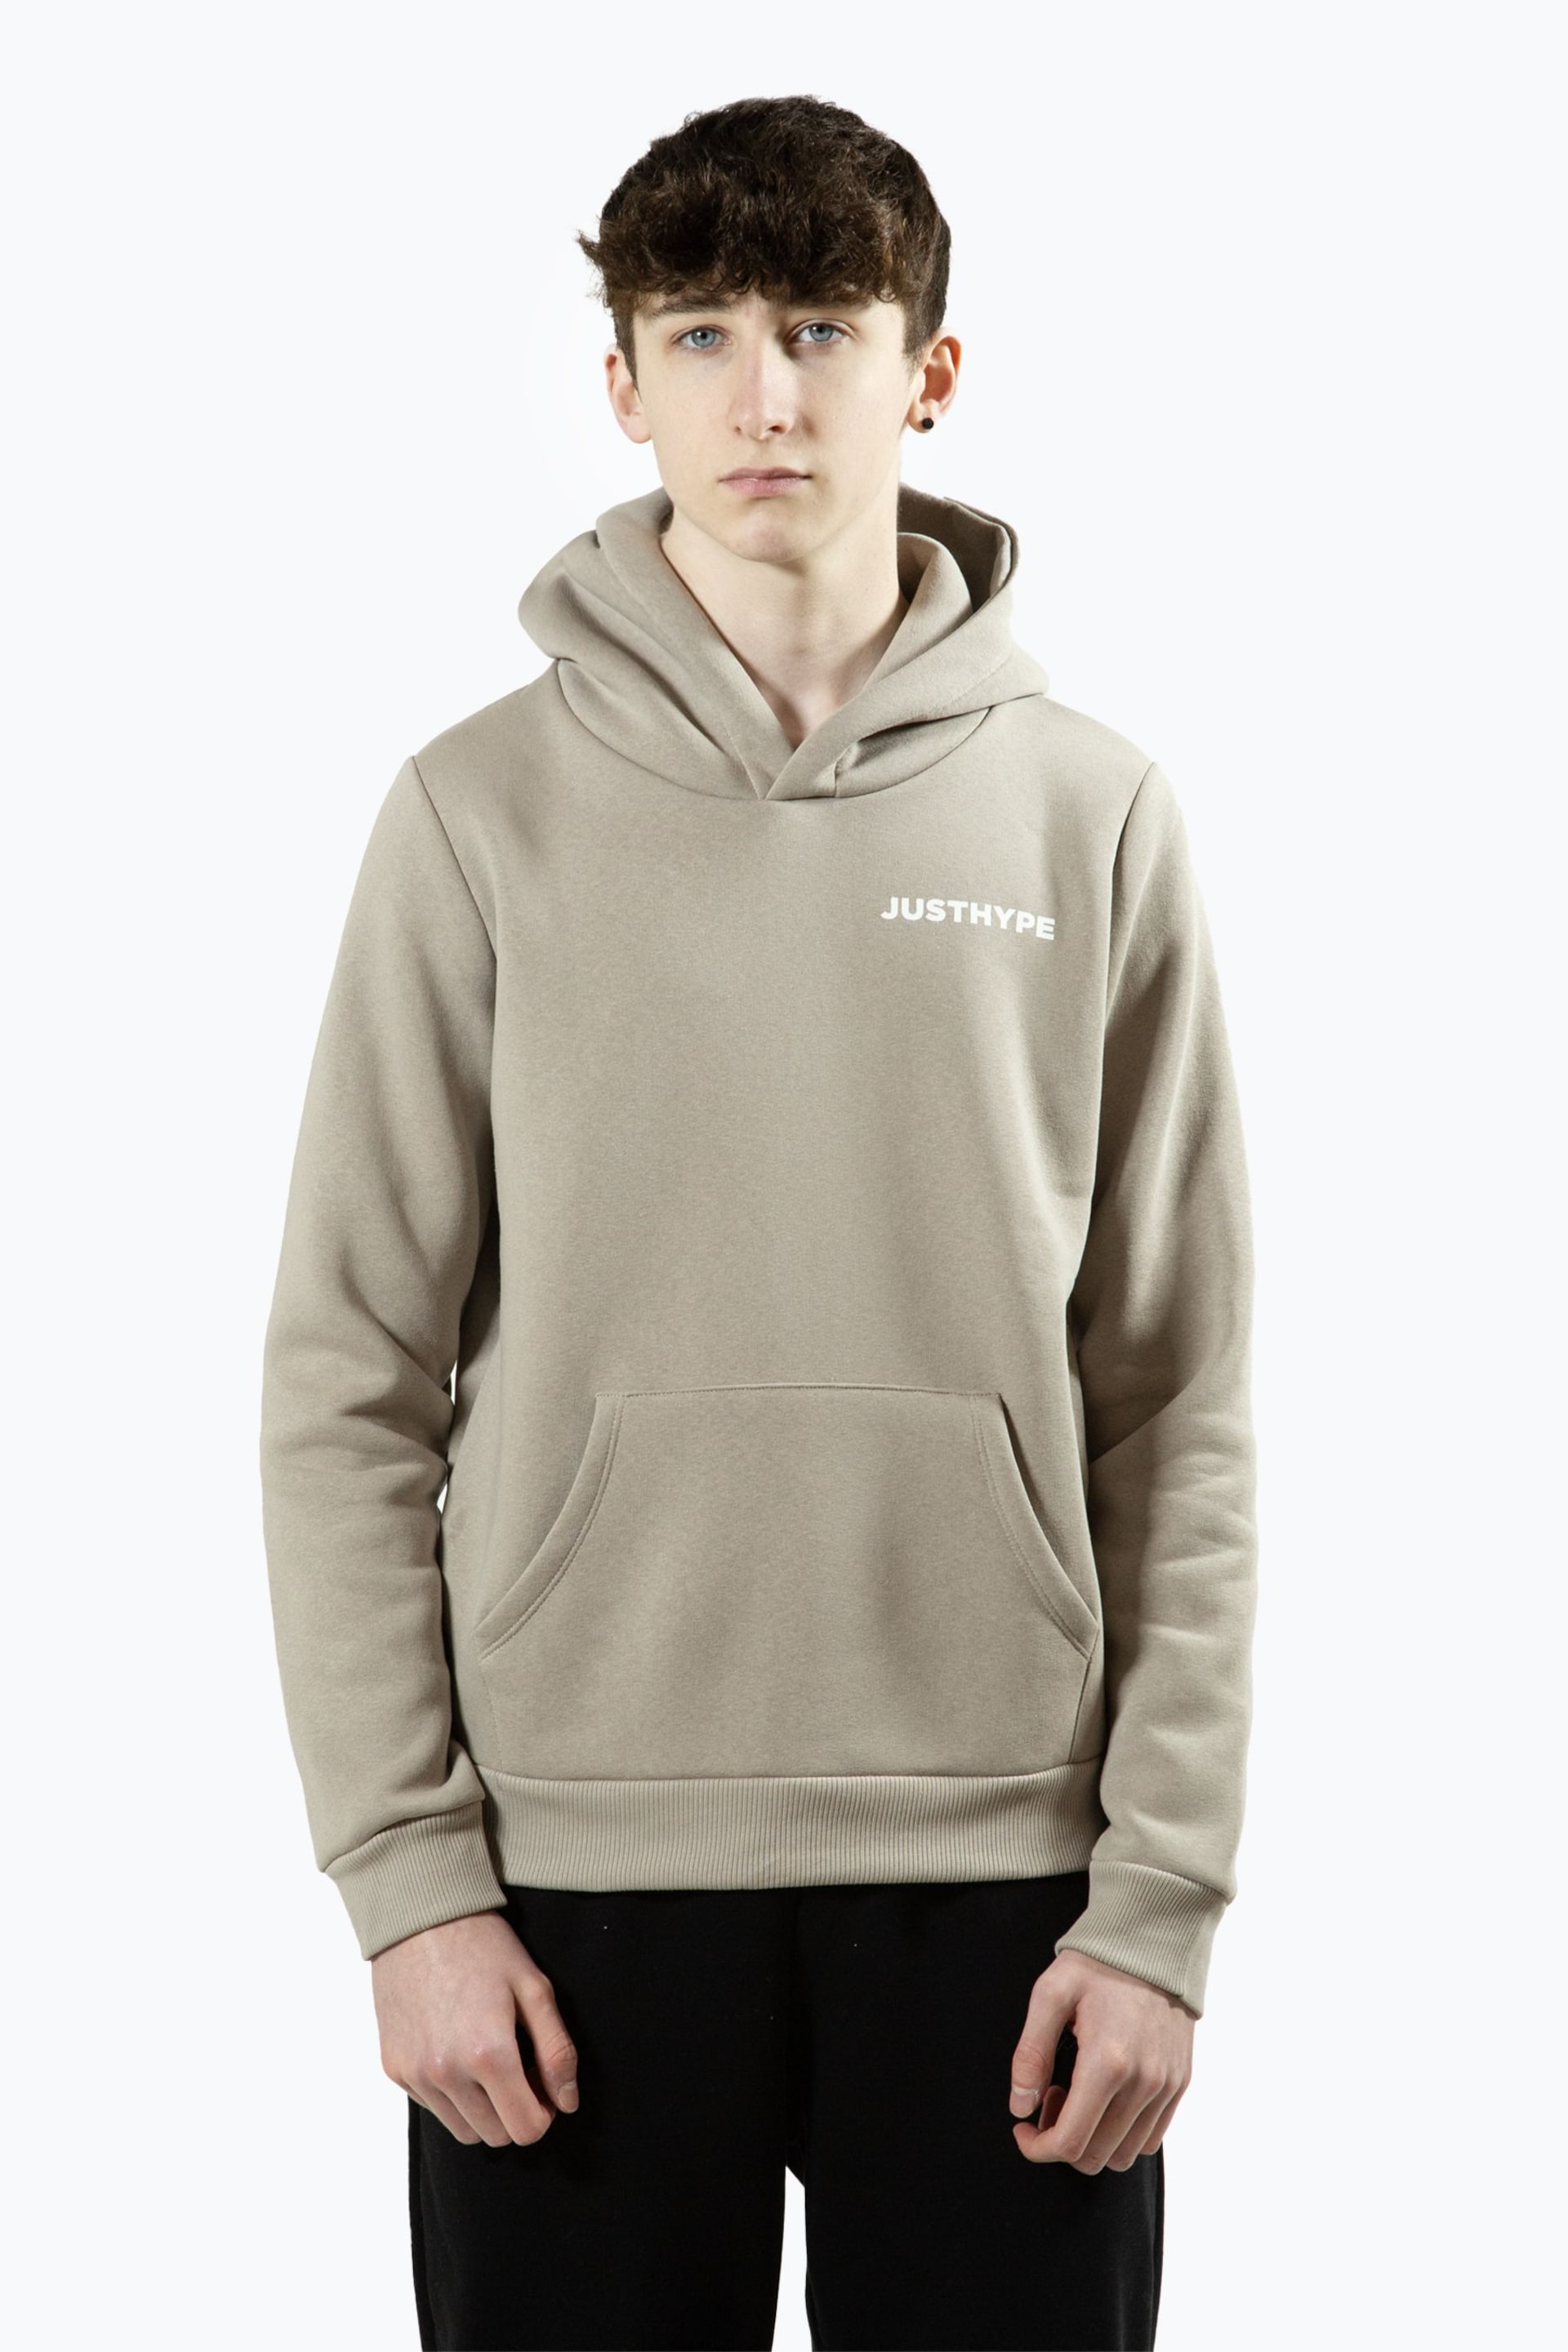 Hype Boys Decade Neutral Hoodie - Image 1 of 5